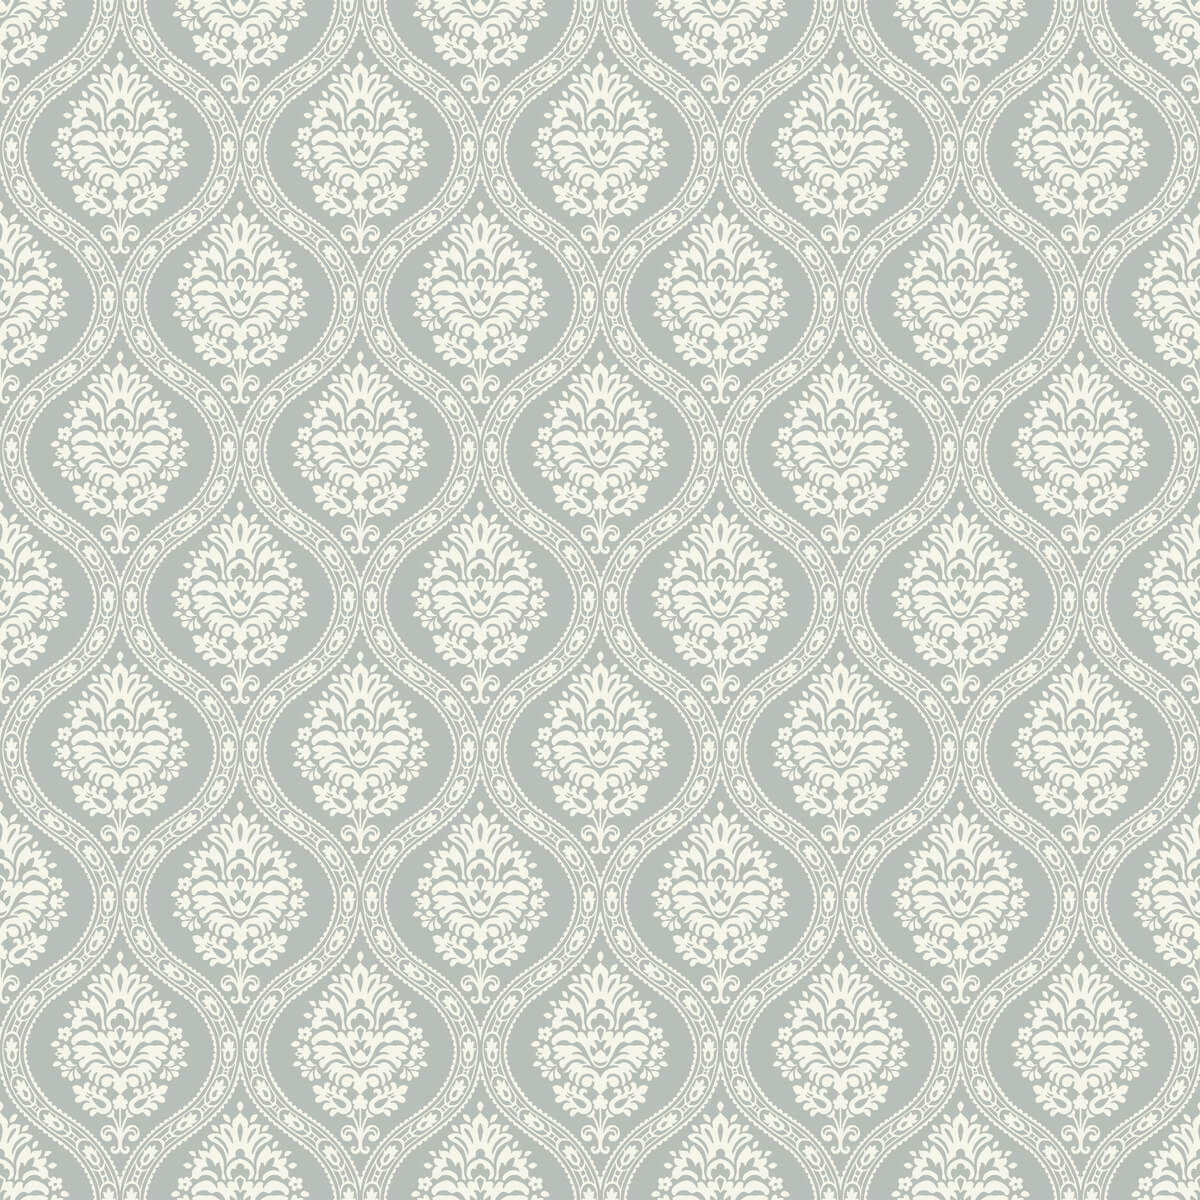 Damask Resource Library Petite Ogee Wallpaper - Pale Green